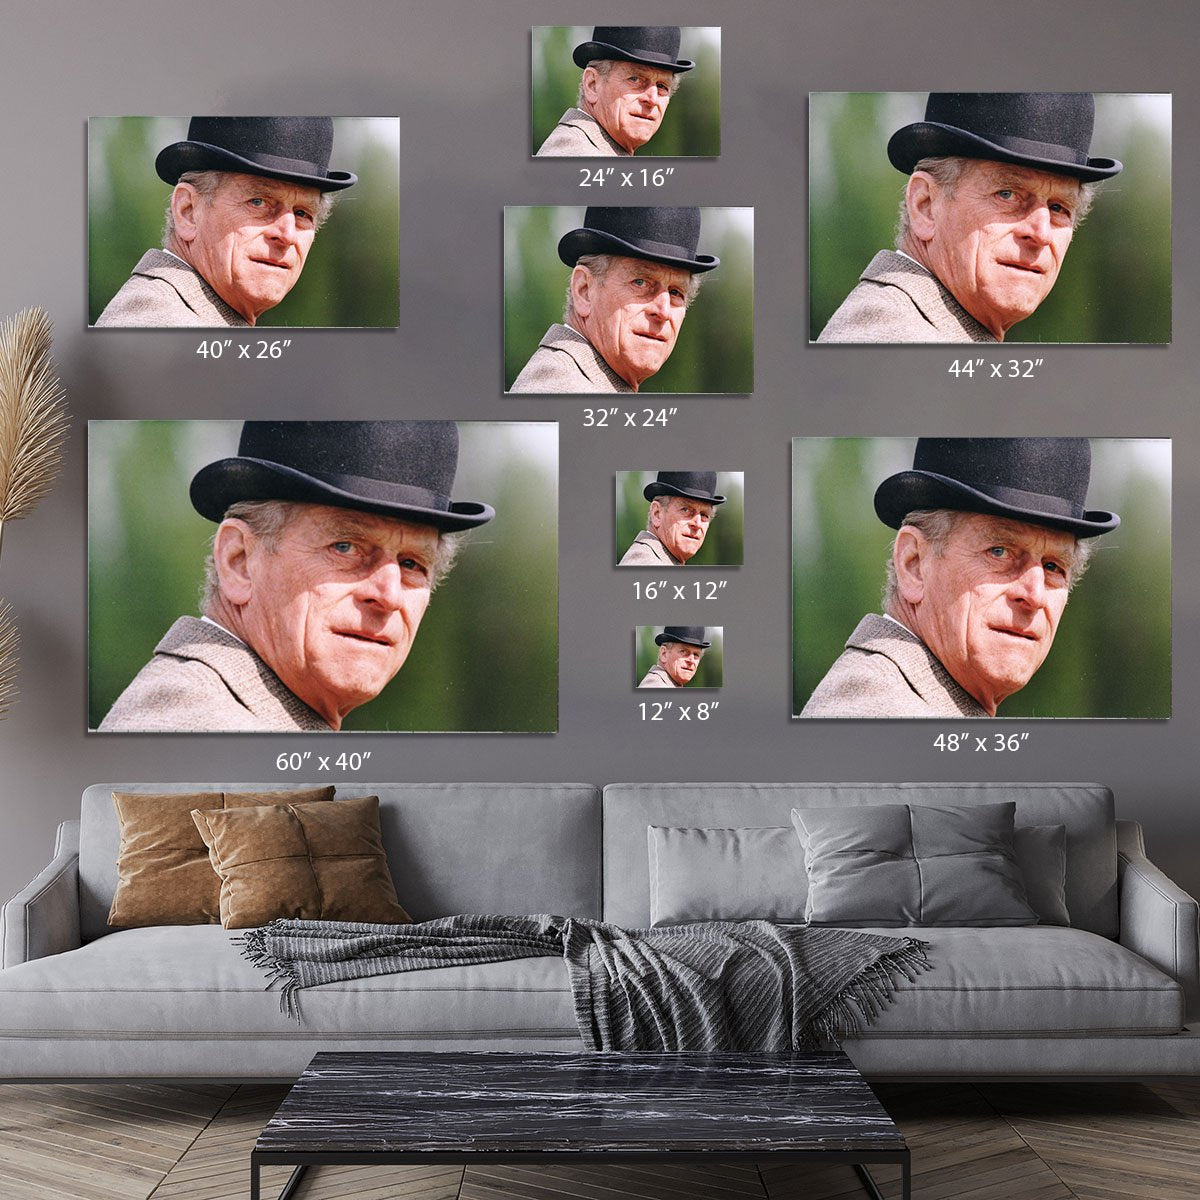 Prince Philip out riding in a black bowler hat Canvas Print or Poster